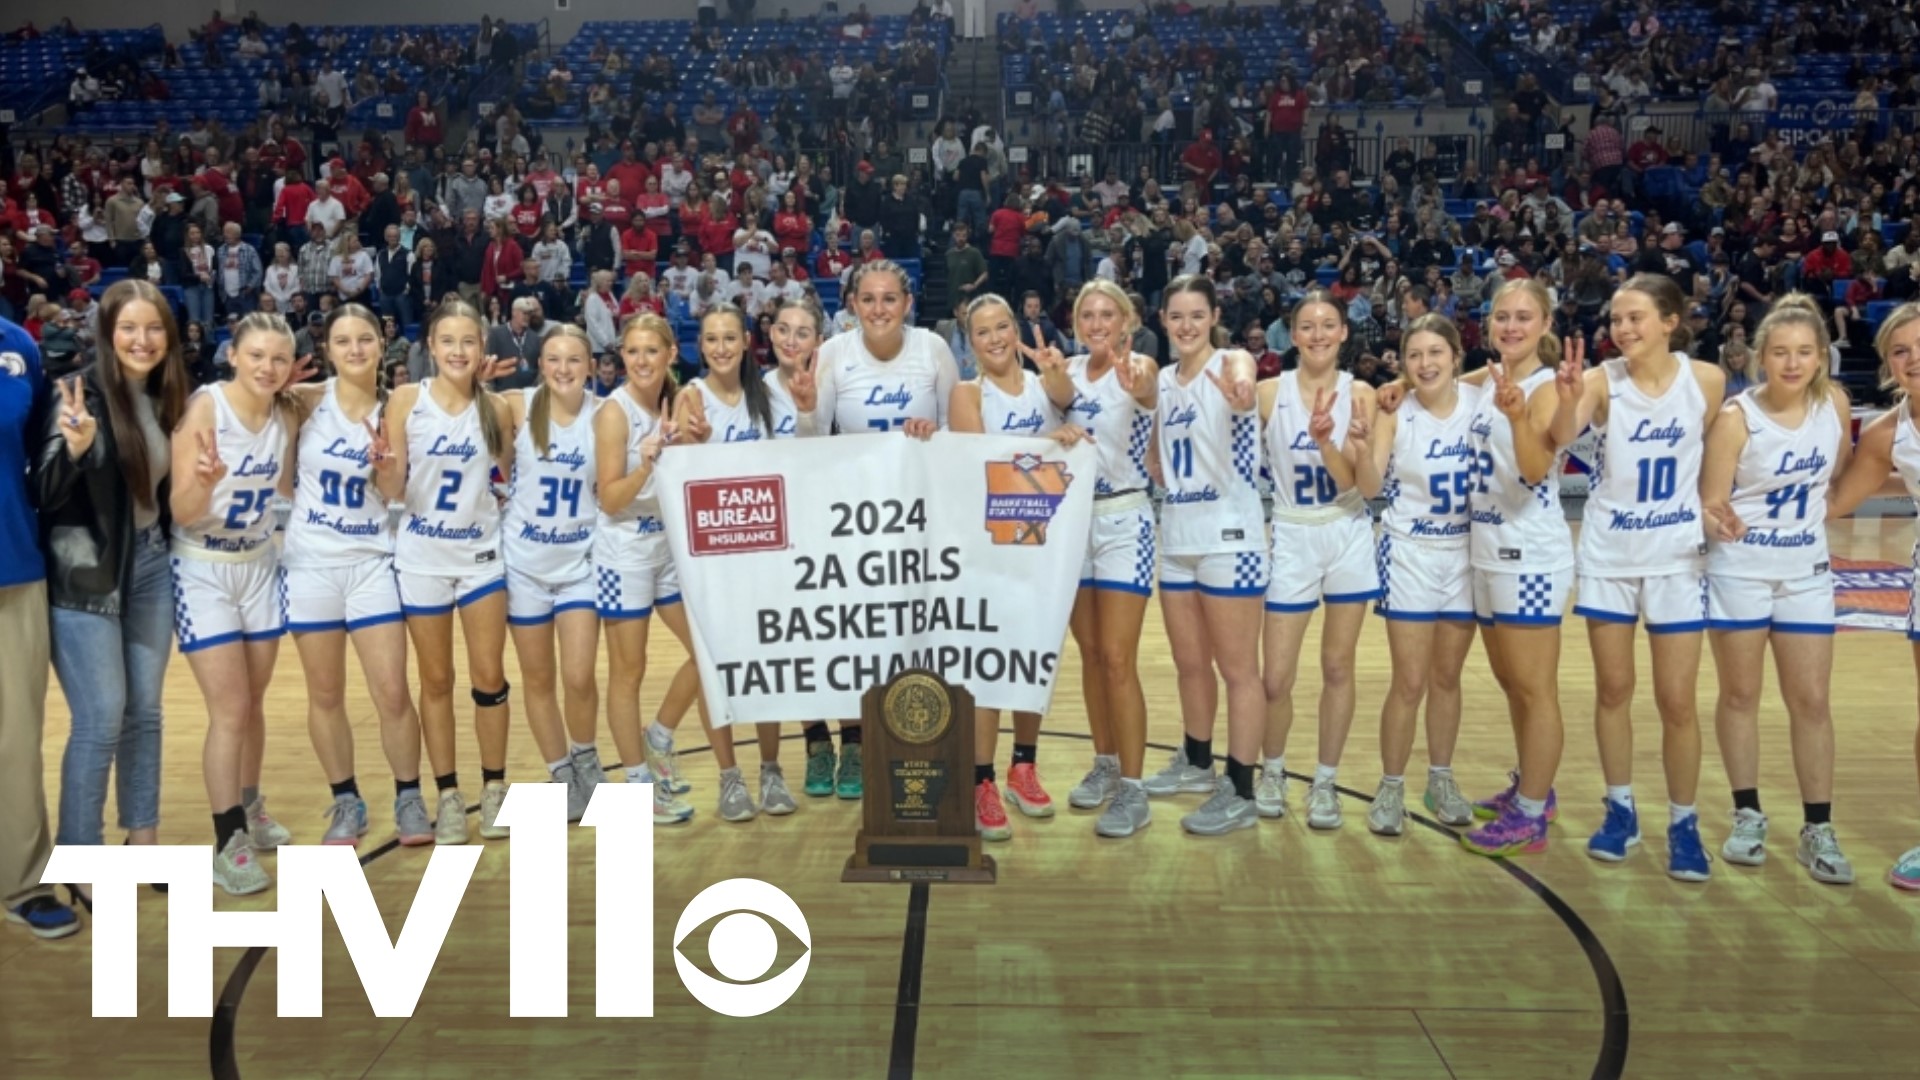 The Lady Warhawks finish the season 43-0 and are back-to-back Class 2A state champions. Dessie McCarty led the way with 20 points and 16 rebounds.